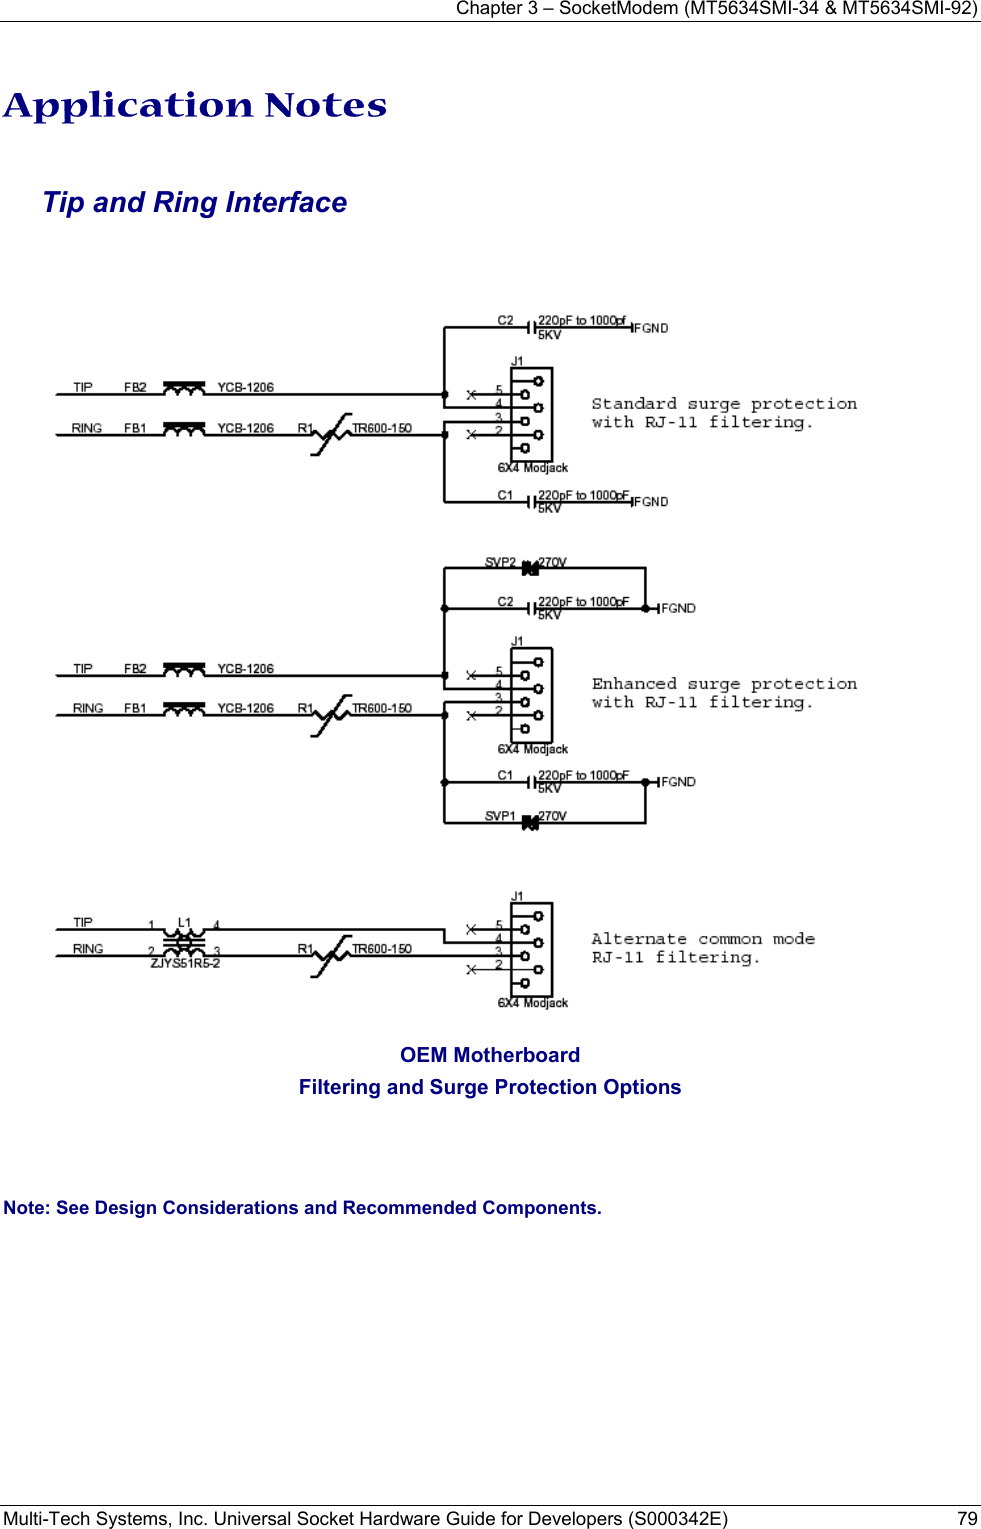 Chapter 3 – SocketModem (MT5634SMI-34 &amp; MT5634SMI-92) Multi-Tech Systems, Inc. Universal Socket Hardware Guide for Developers (S000342E)  79  Application Notes  Tip and Ring Interface    OEM Motherboard Filtering and Surge Protection Options   Note: See Design Considerations and Recommended Components.   